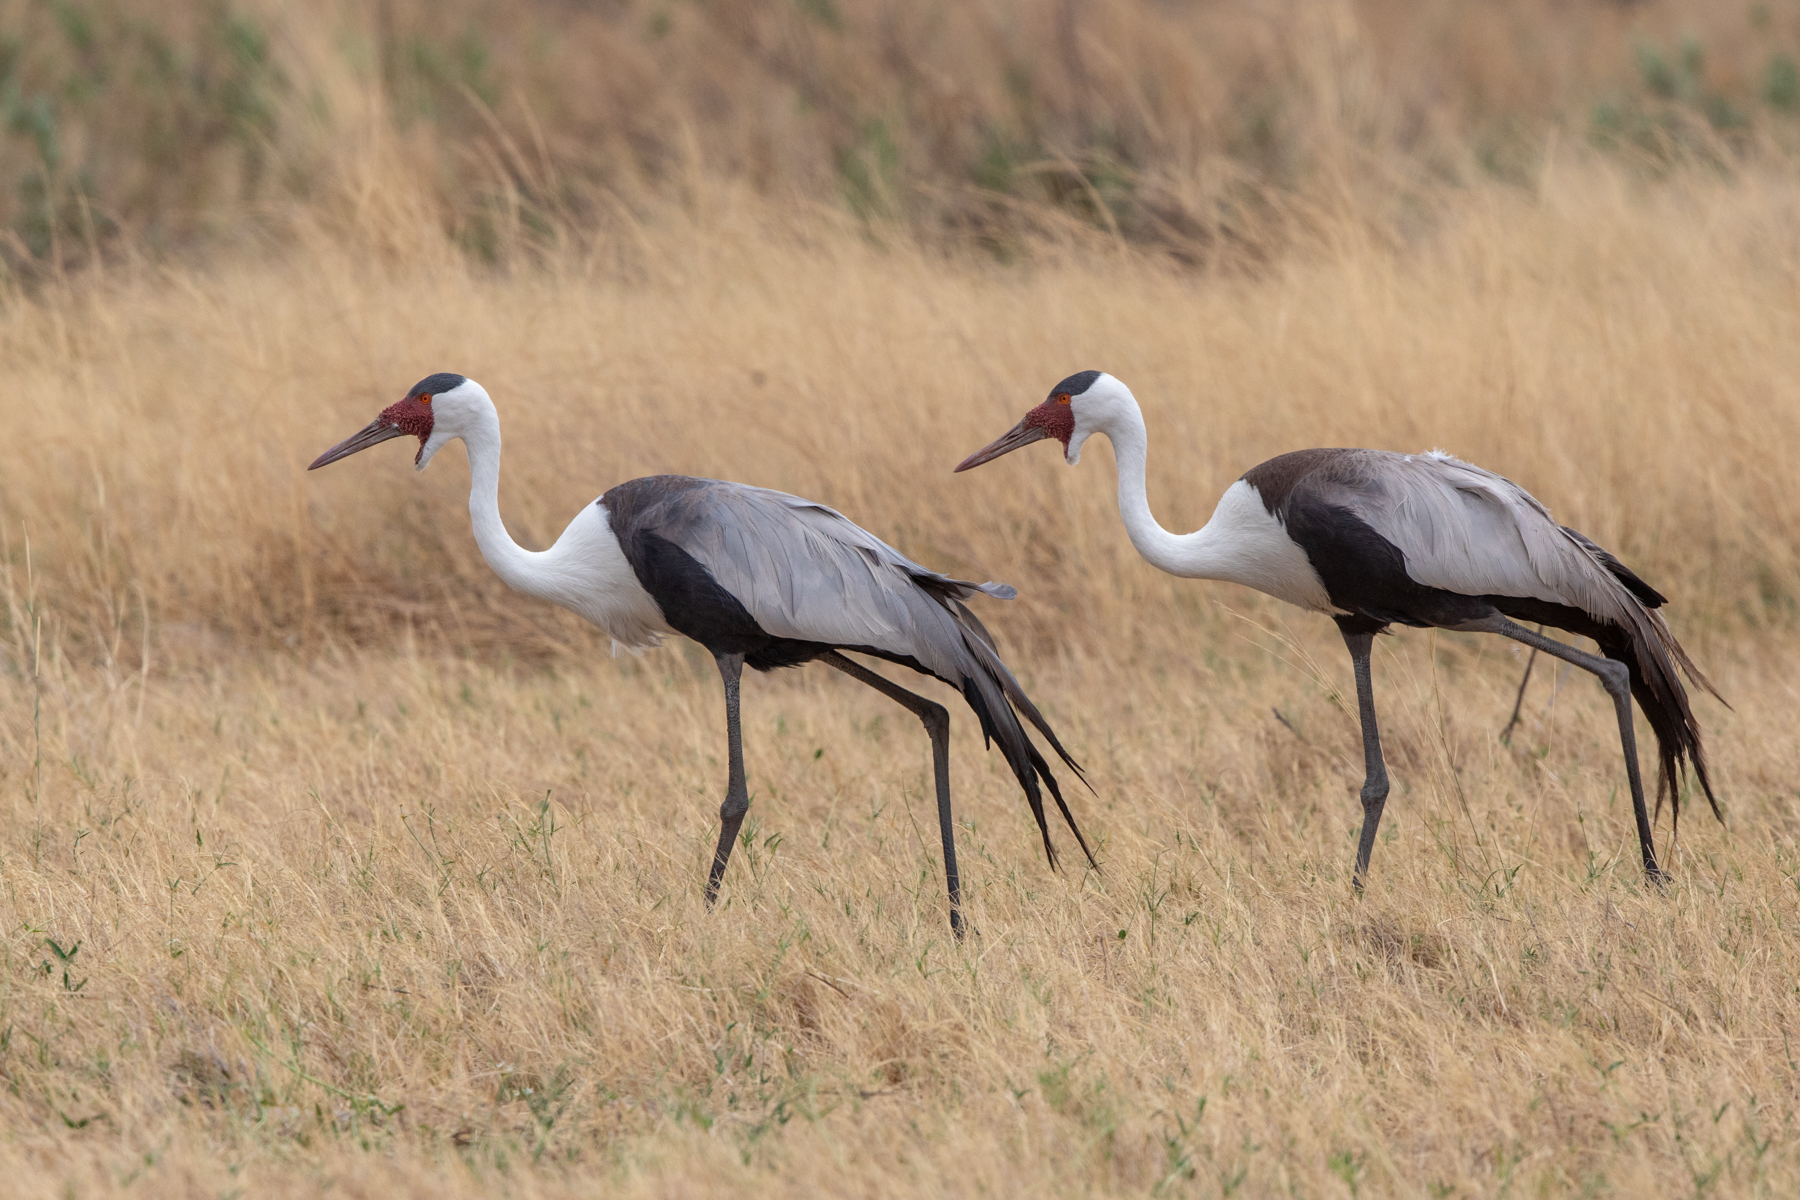 A pair of elegant but endangered Wattled Cranes in Moremi Game Reserve at the edge of Botswana's Okavango Delta